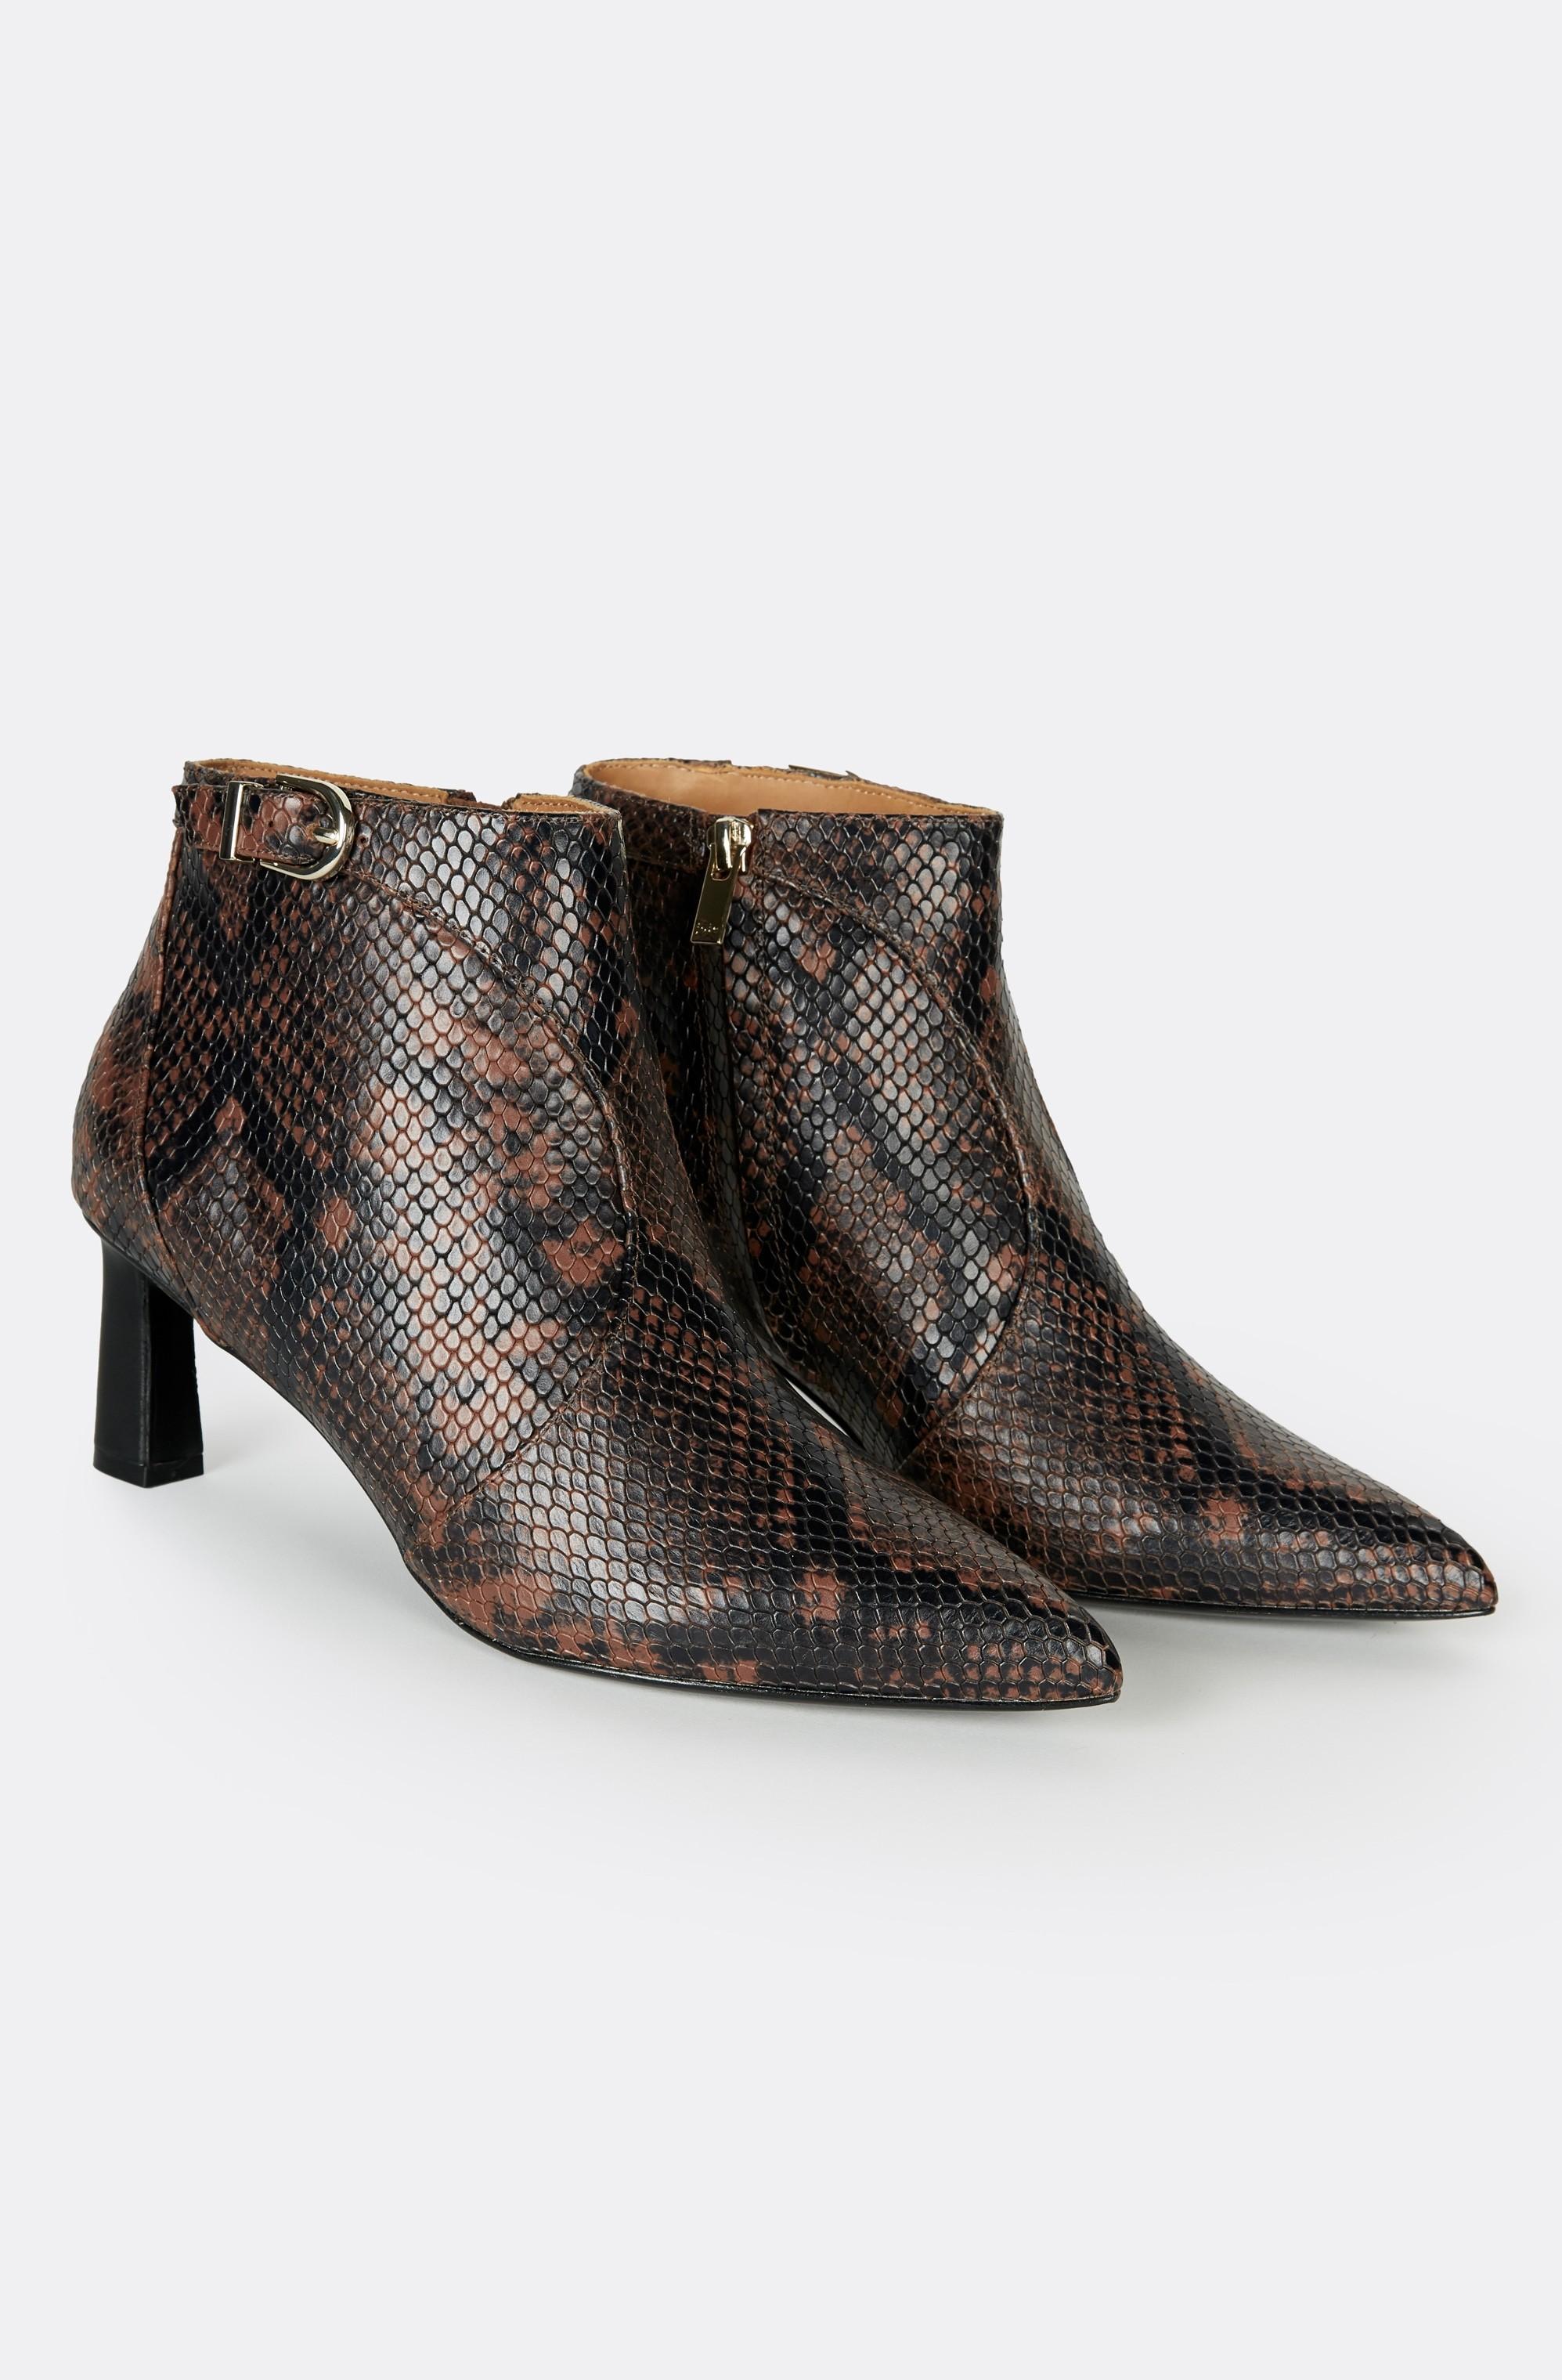 Joie Rawly Python Print Bootie in Brown - Lyst